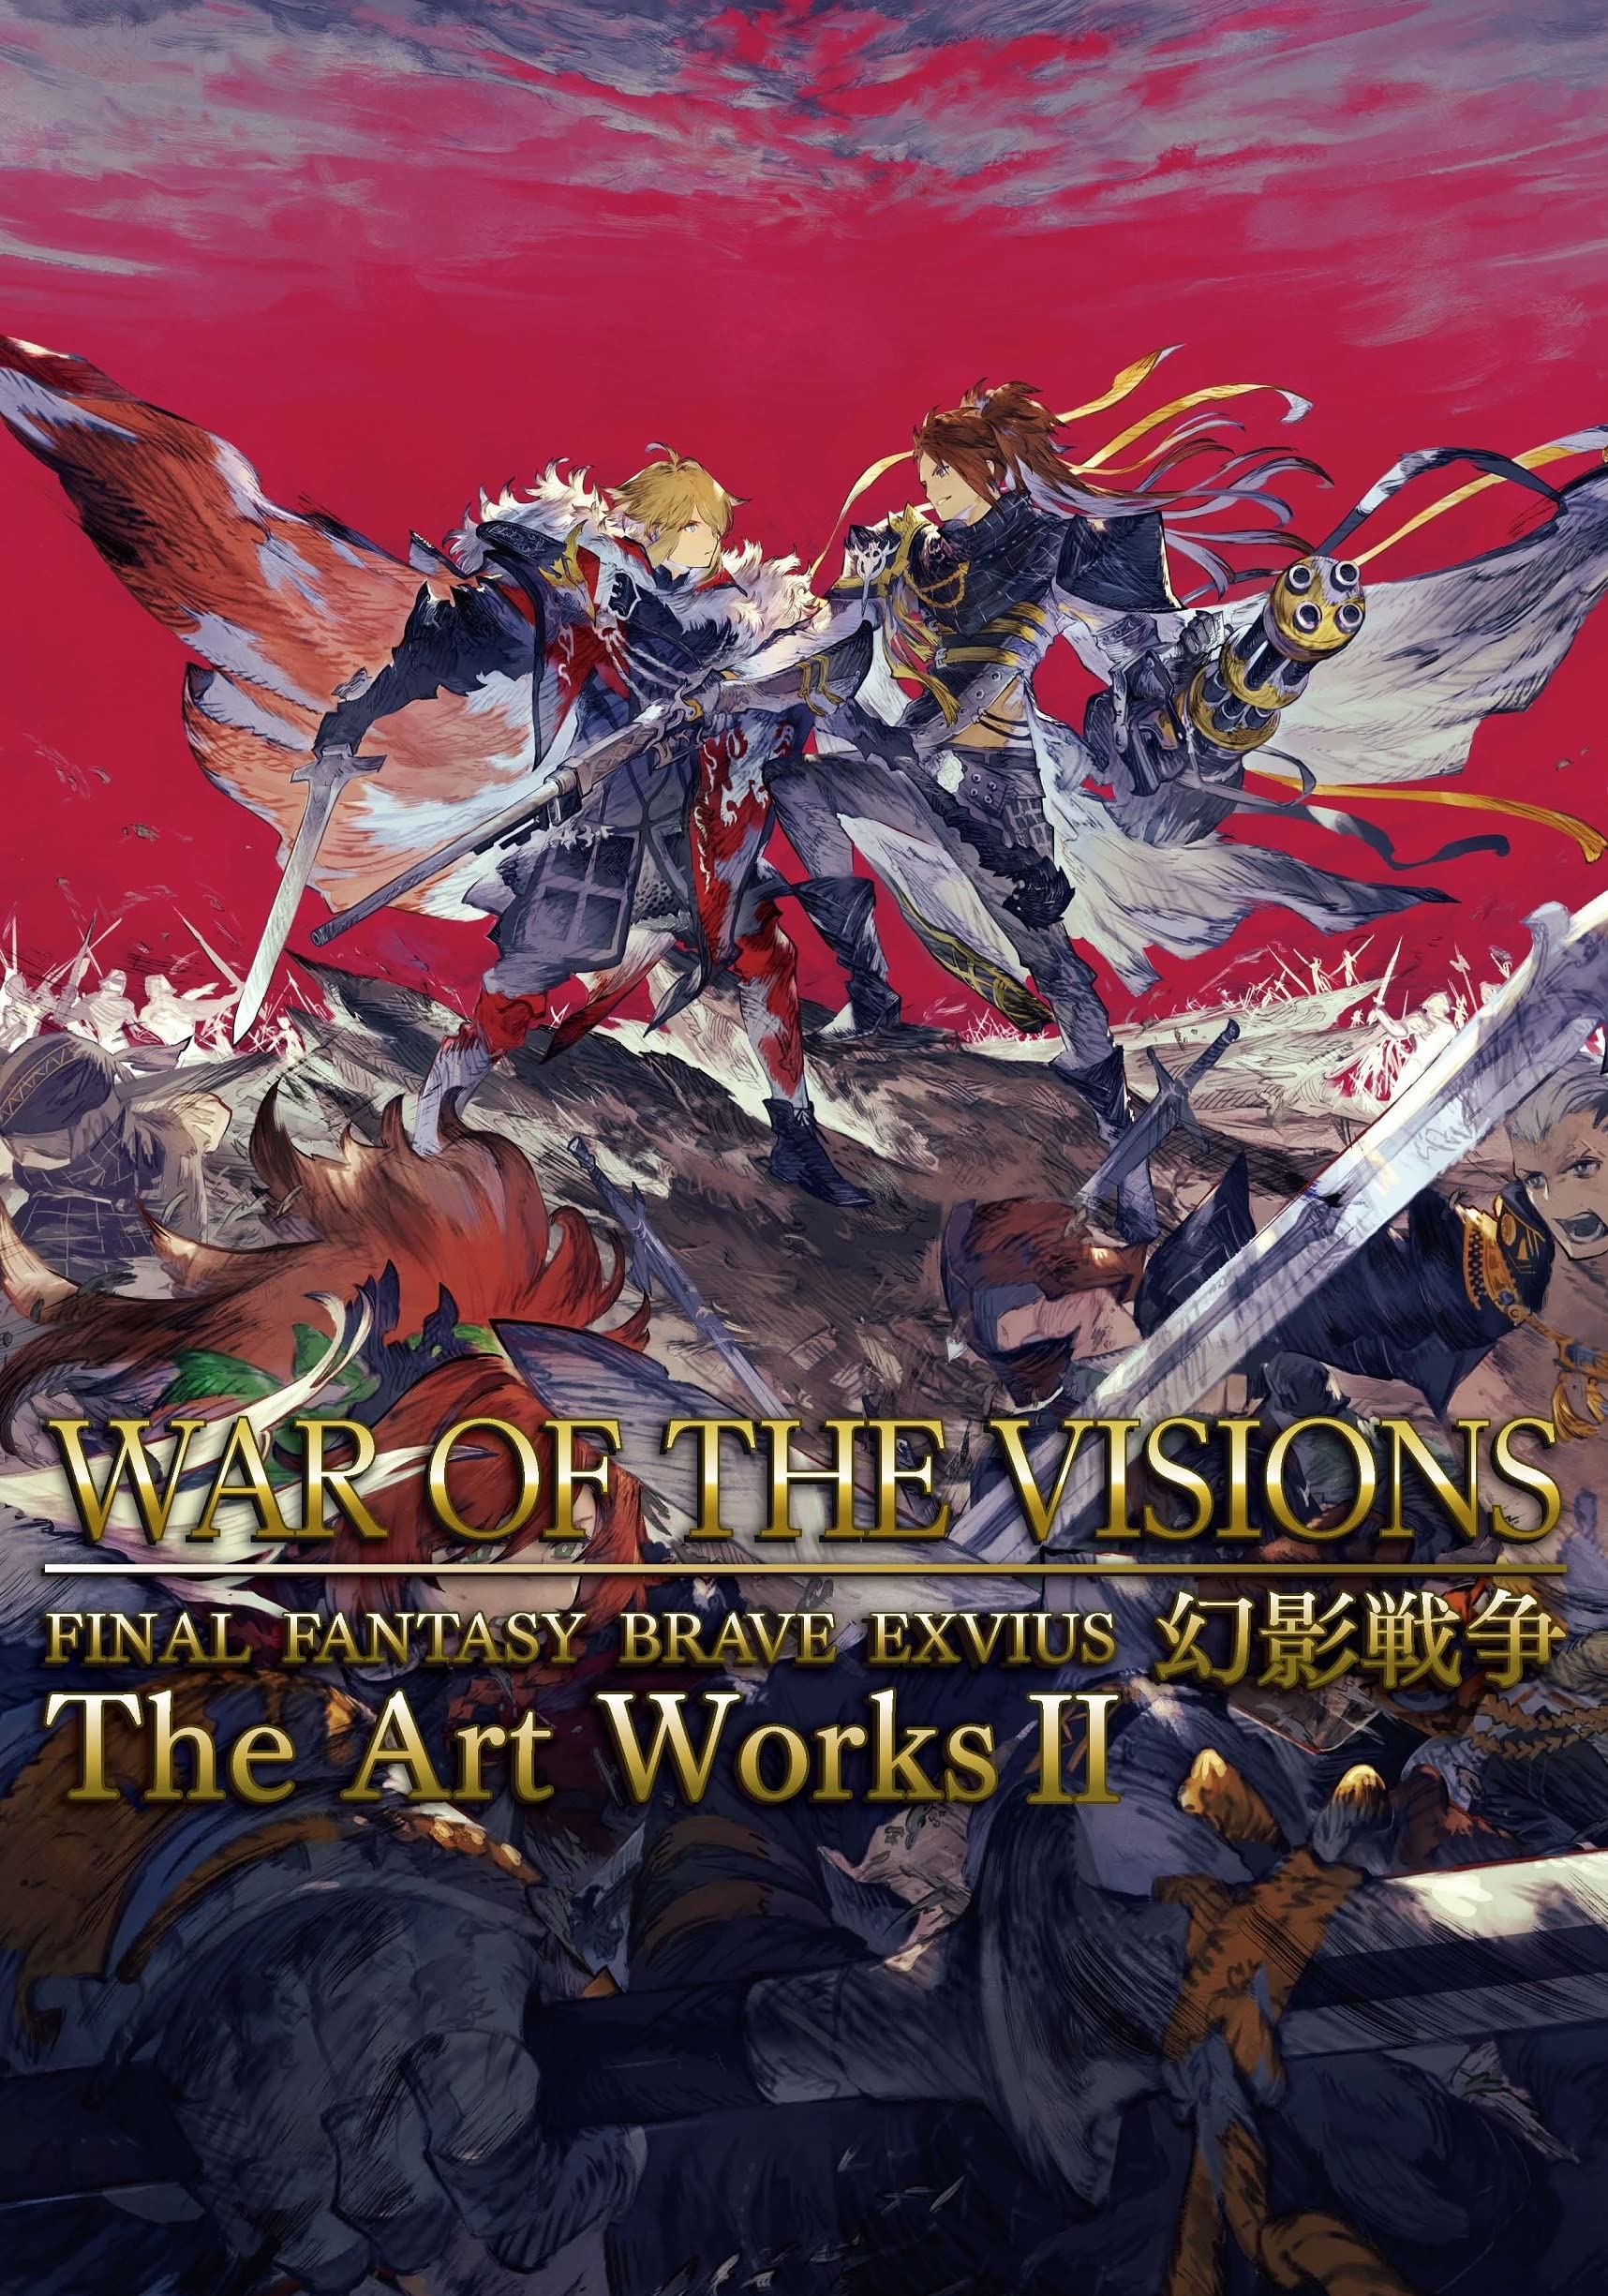 FINAL FANTASY VIII Collaboration!, WAR OF THE VISIONS FINAL FANTASY BRAVE  EXVIUS Global Official Site